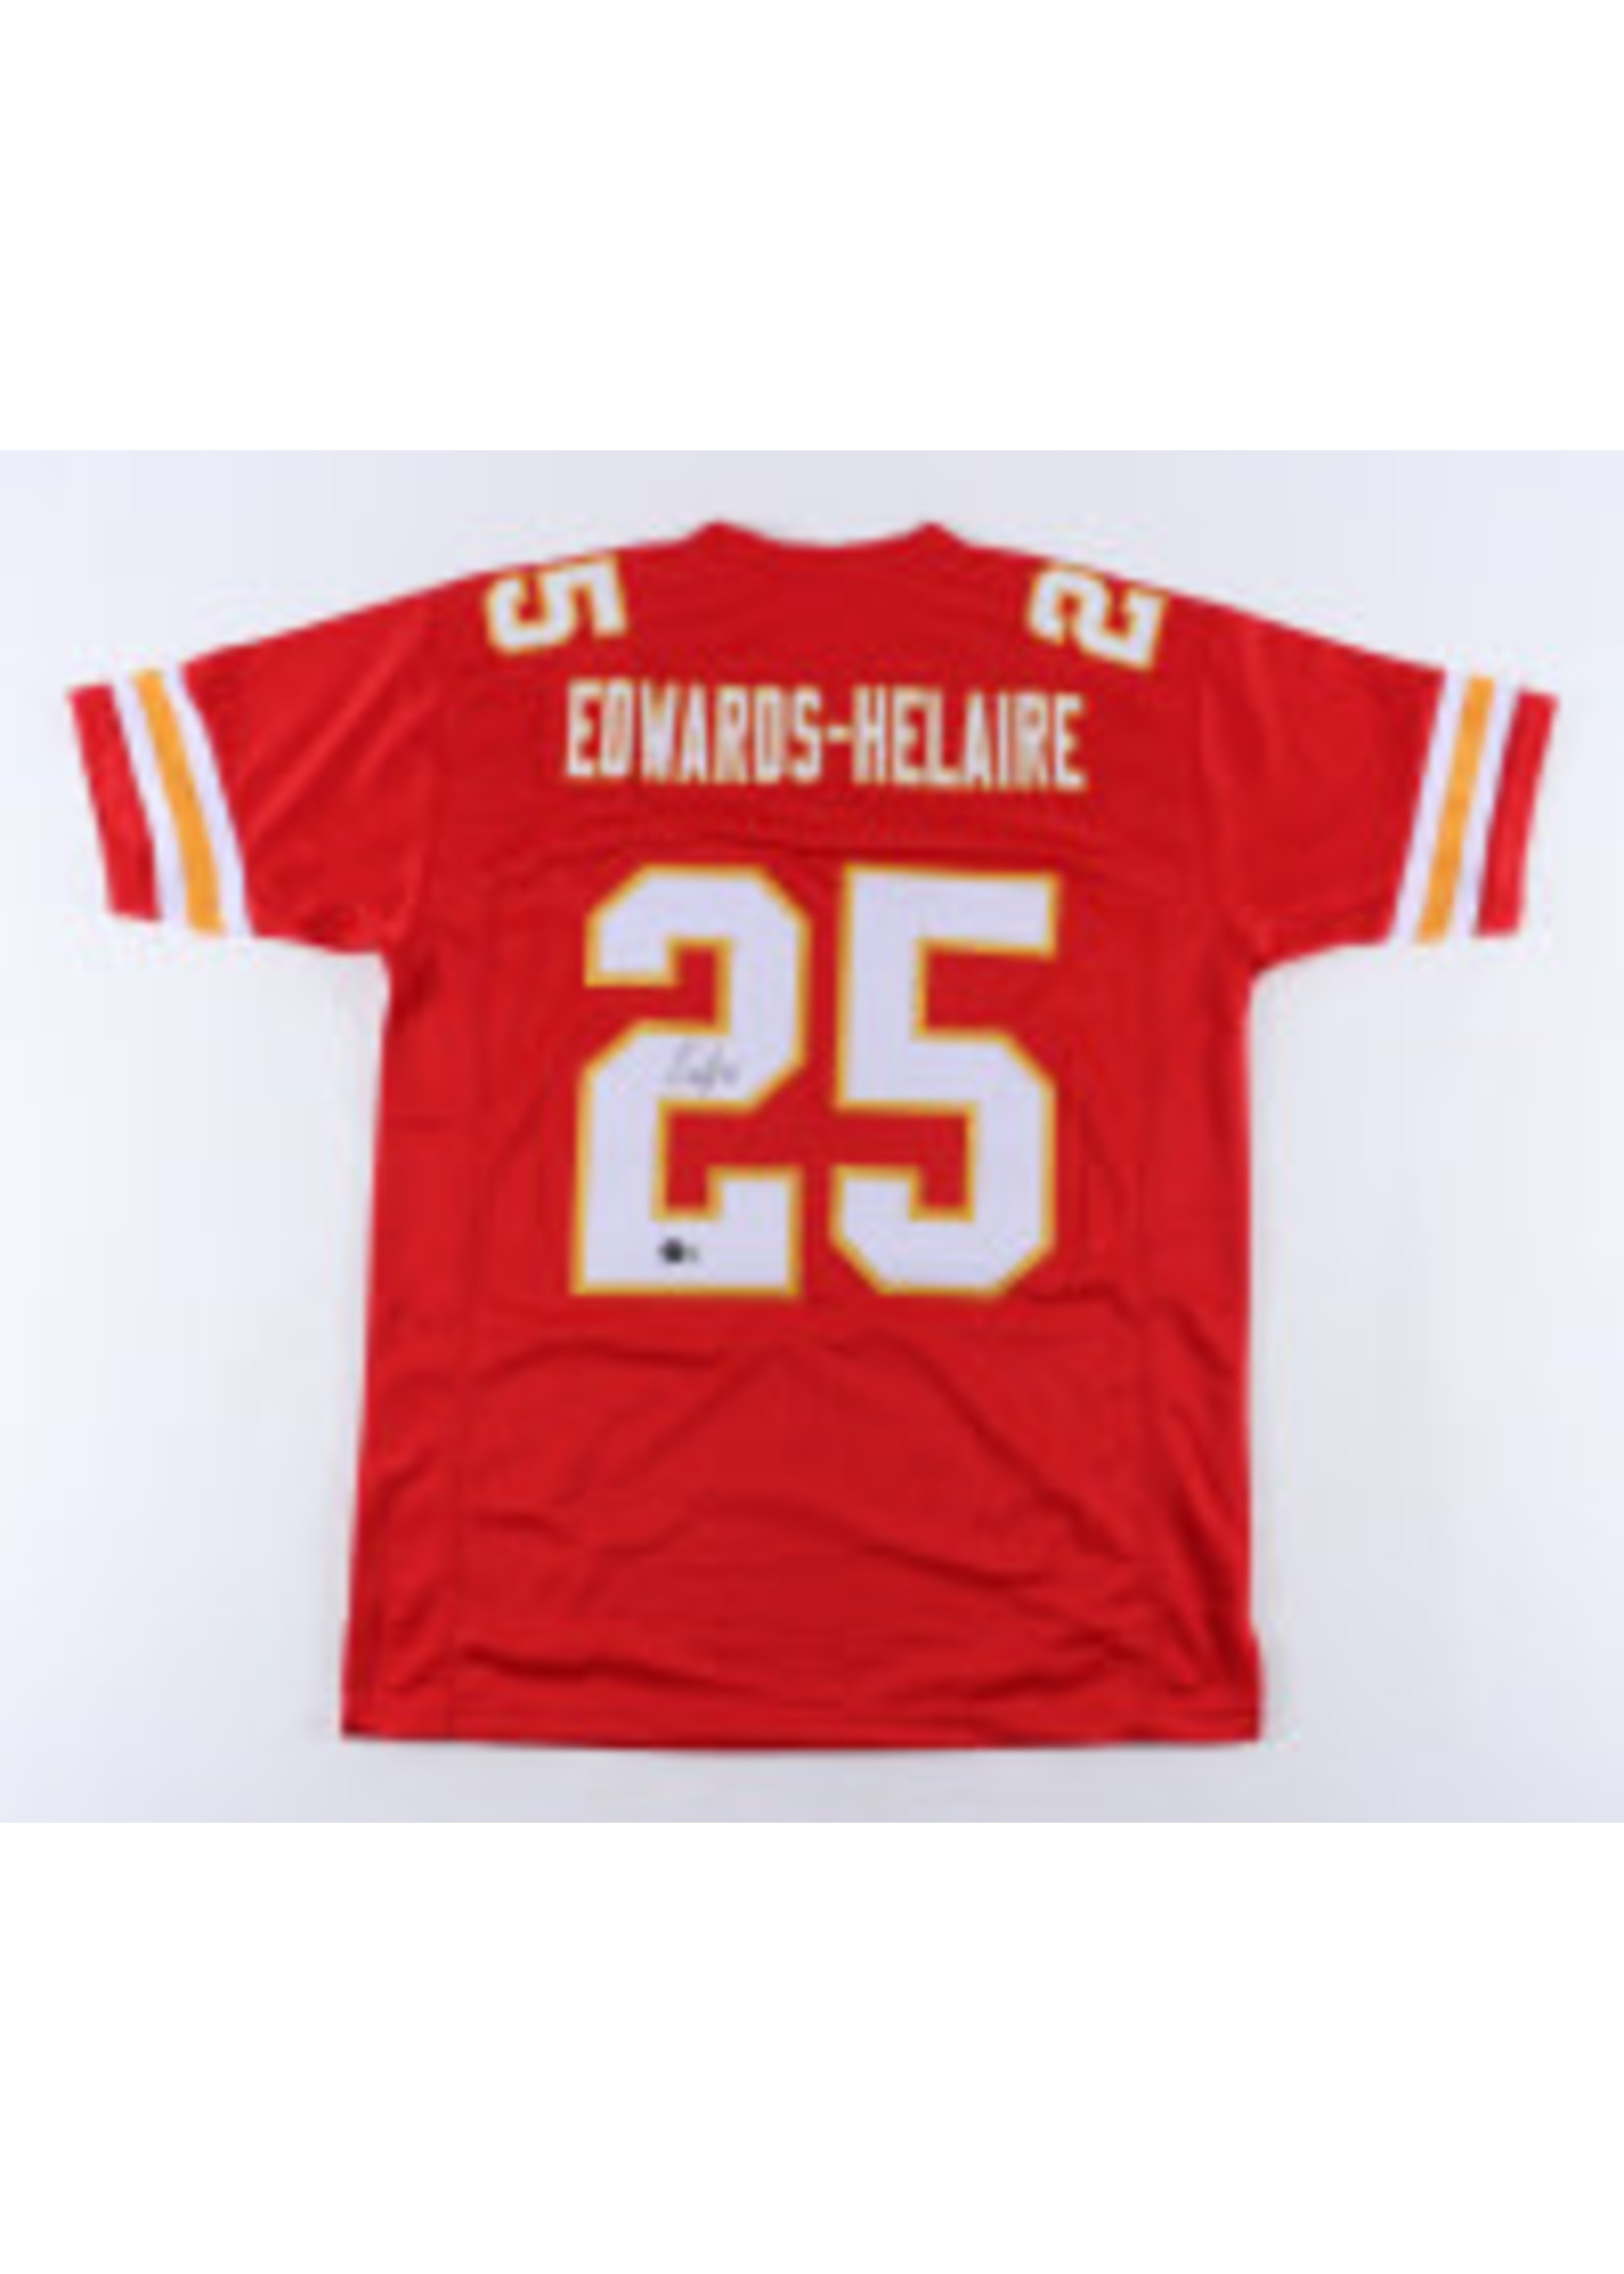 Clyde Edwards-Helaire Jersey